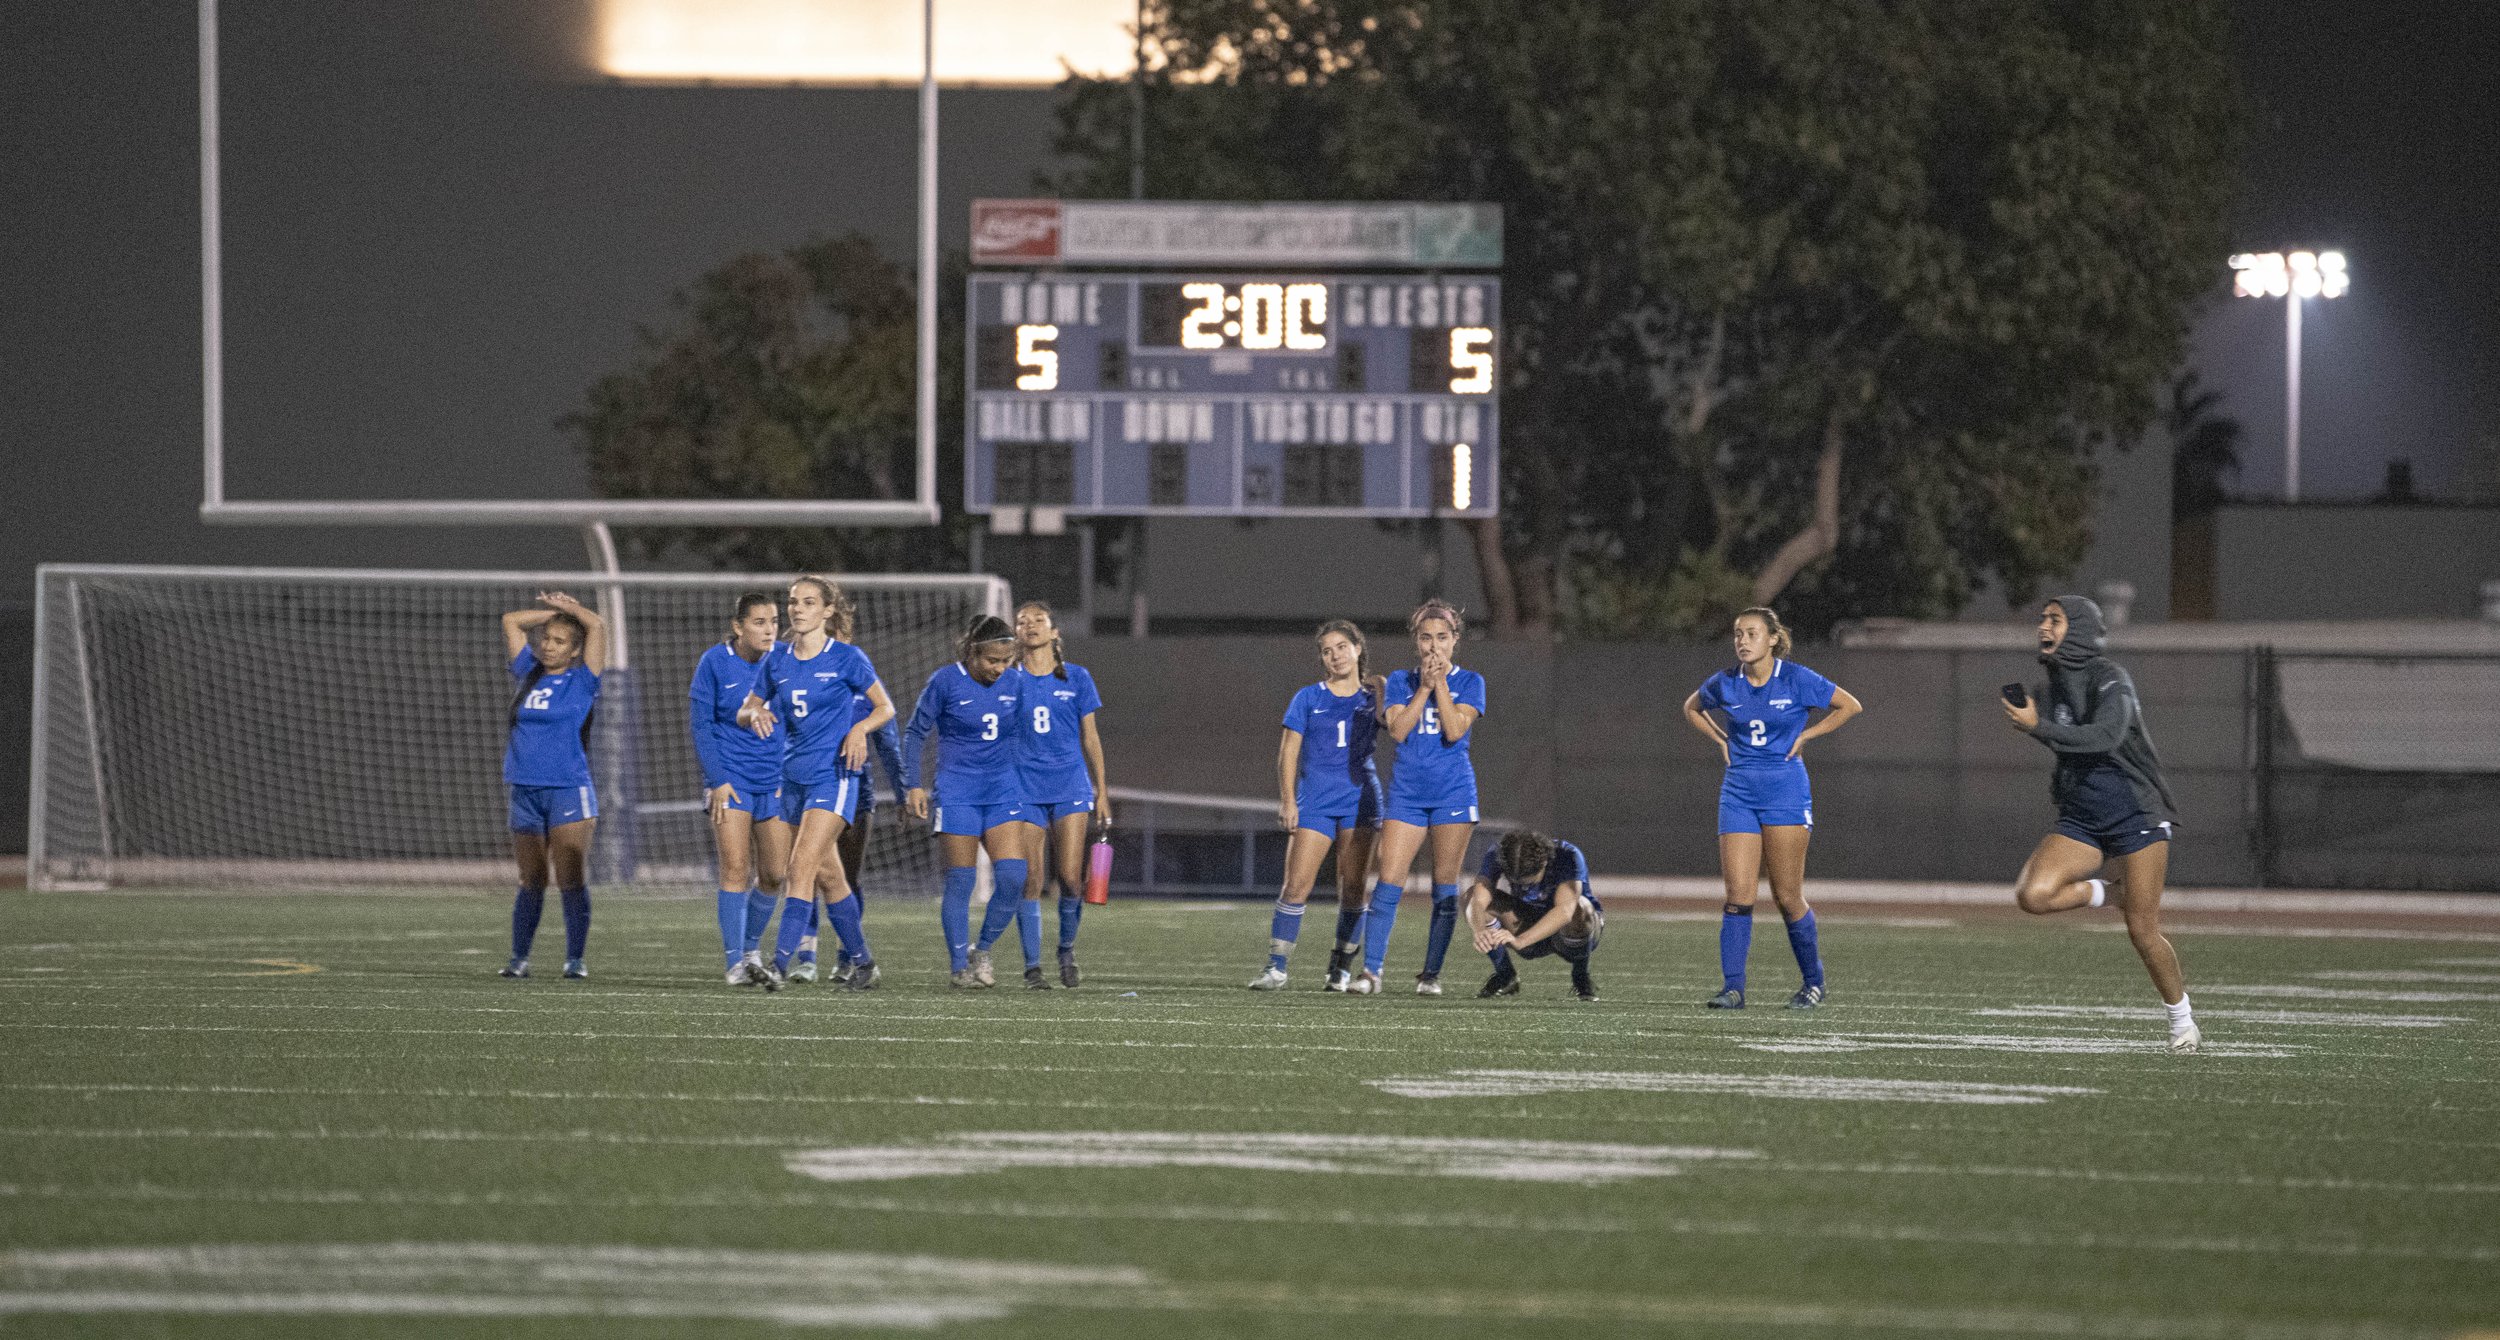  Santa Monica College Corsairs players sit in shock as an El Camino College player runs in frame after the Corsairs goalie missed the final shoot out attempt on Nov. 18, 2021 at Santa Monica College. The Corsairs would take the 5-4 loss to end their 